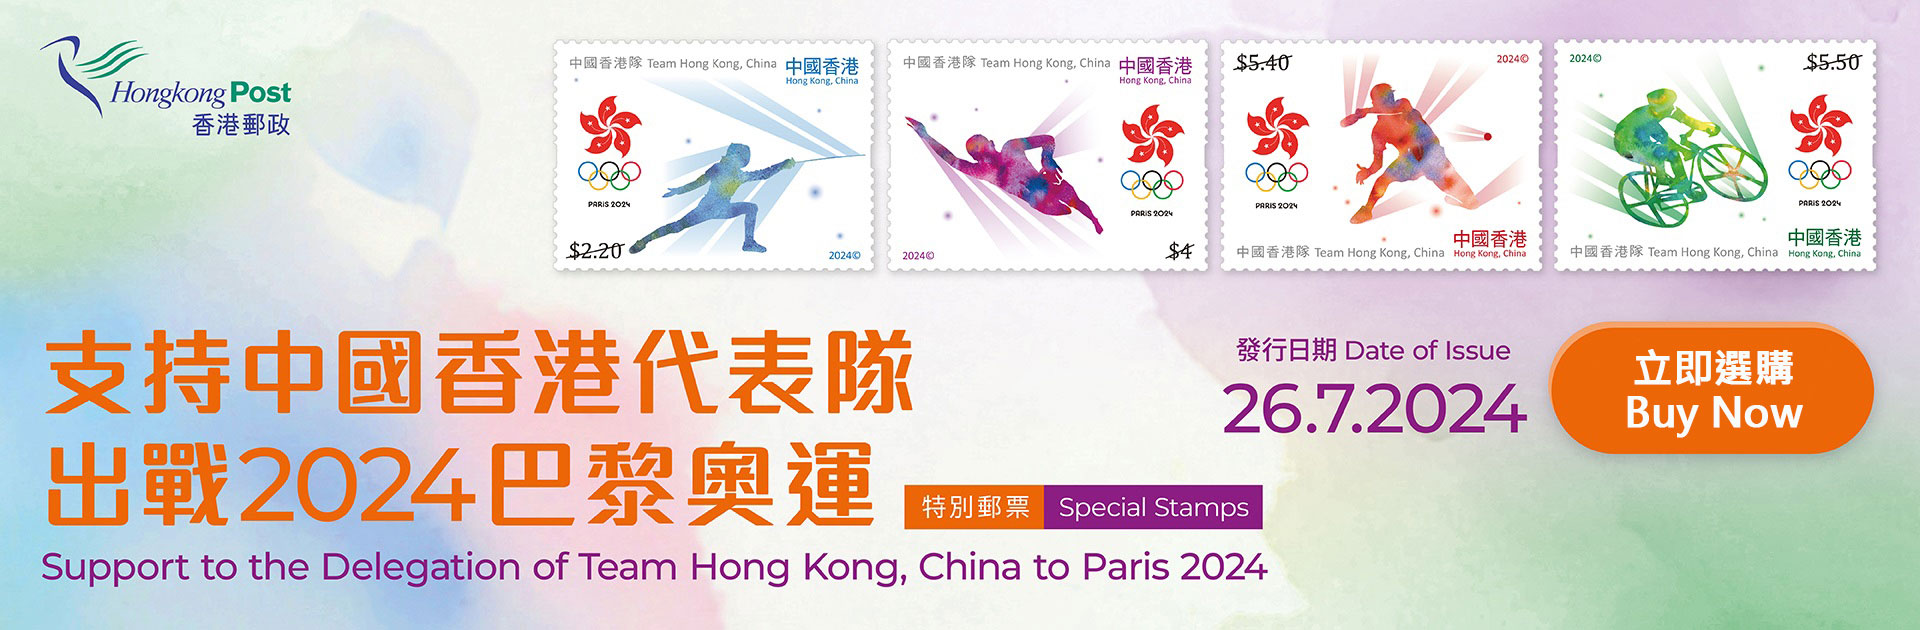 "Support to the Delegation of Team Hong Kong, China to Paris 2024" Special Stamps 